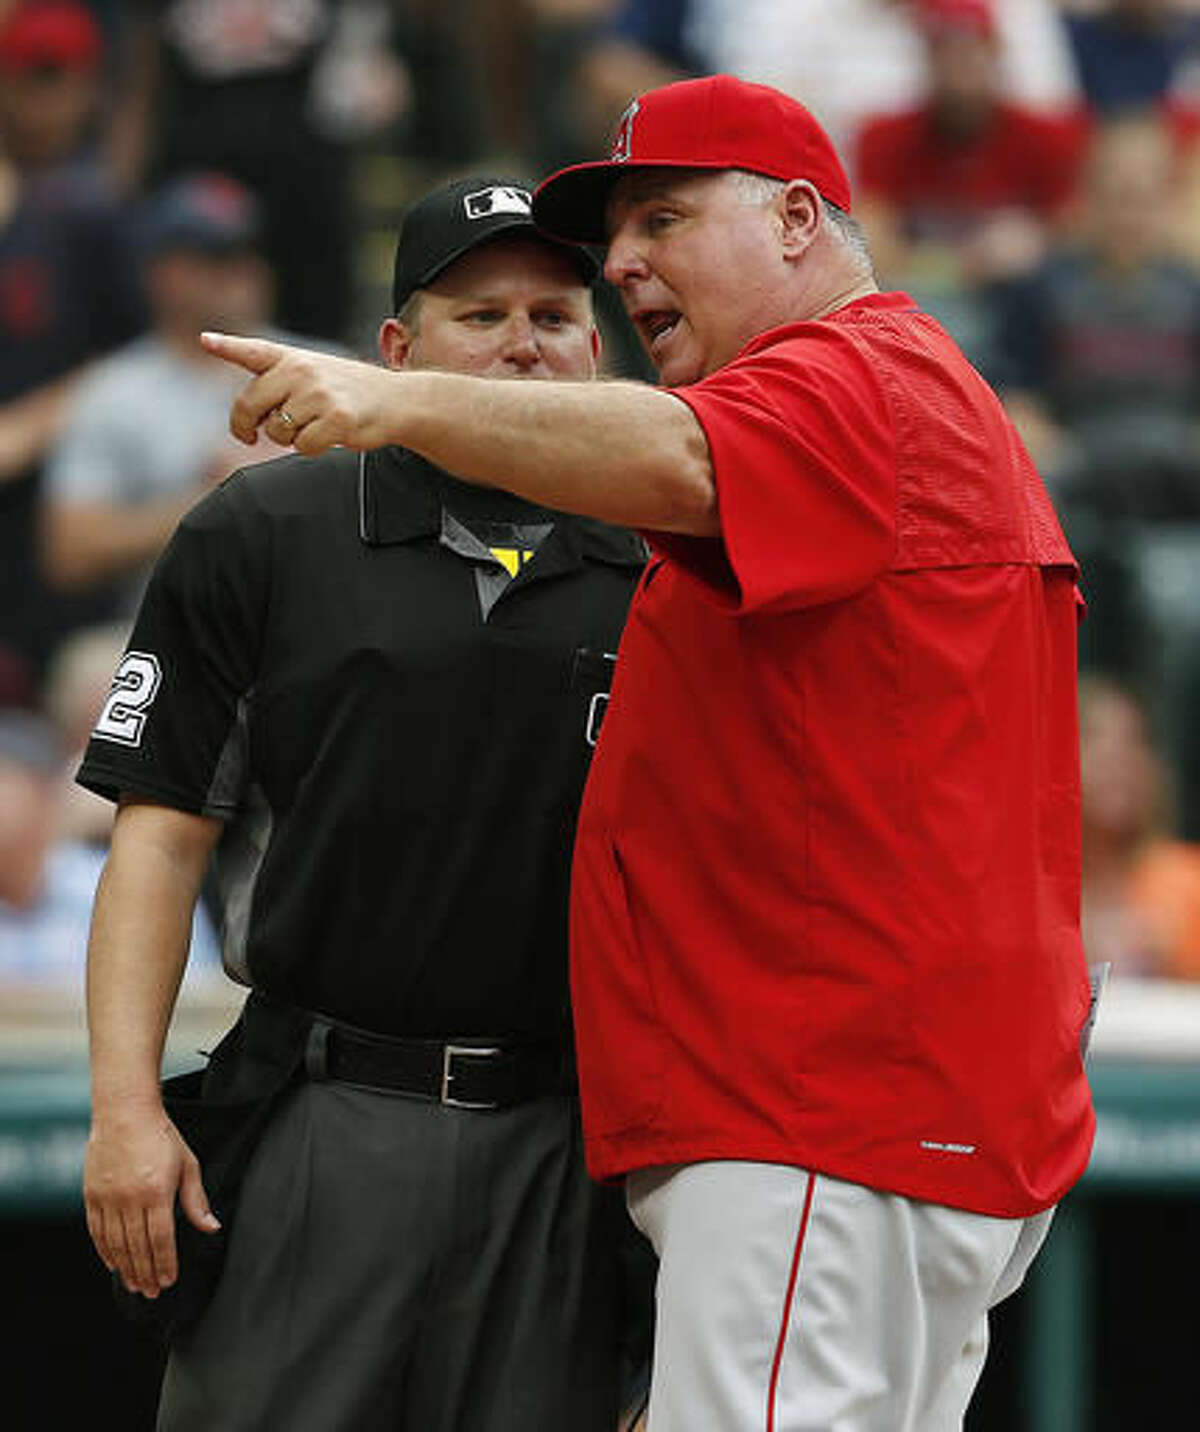 Los Angeles Angels manager Mike Scioscia, right, argues home plate umpire Clint Fagan after Fagan ejected Albert Pujols during the eighth inning of a baseball game against the Cleveland Indians, Sunday, Aug. 14, 2016, in Cleveland. (AP Photo/Ron Schwane)